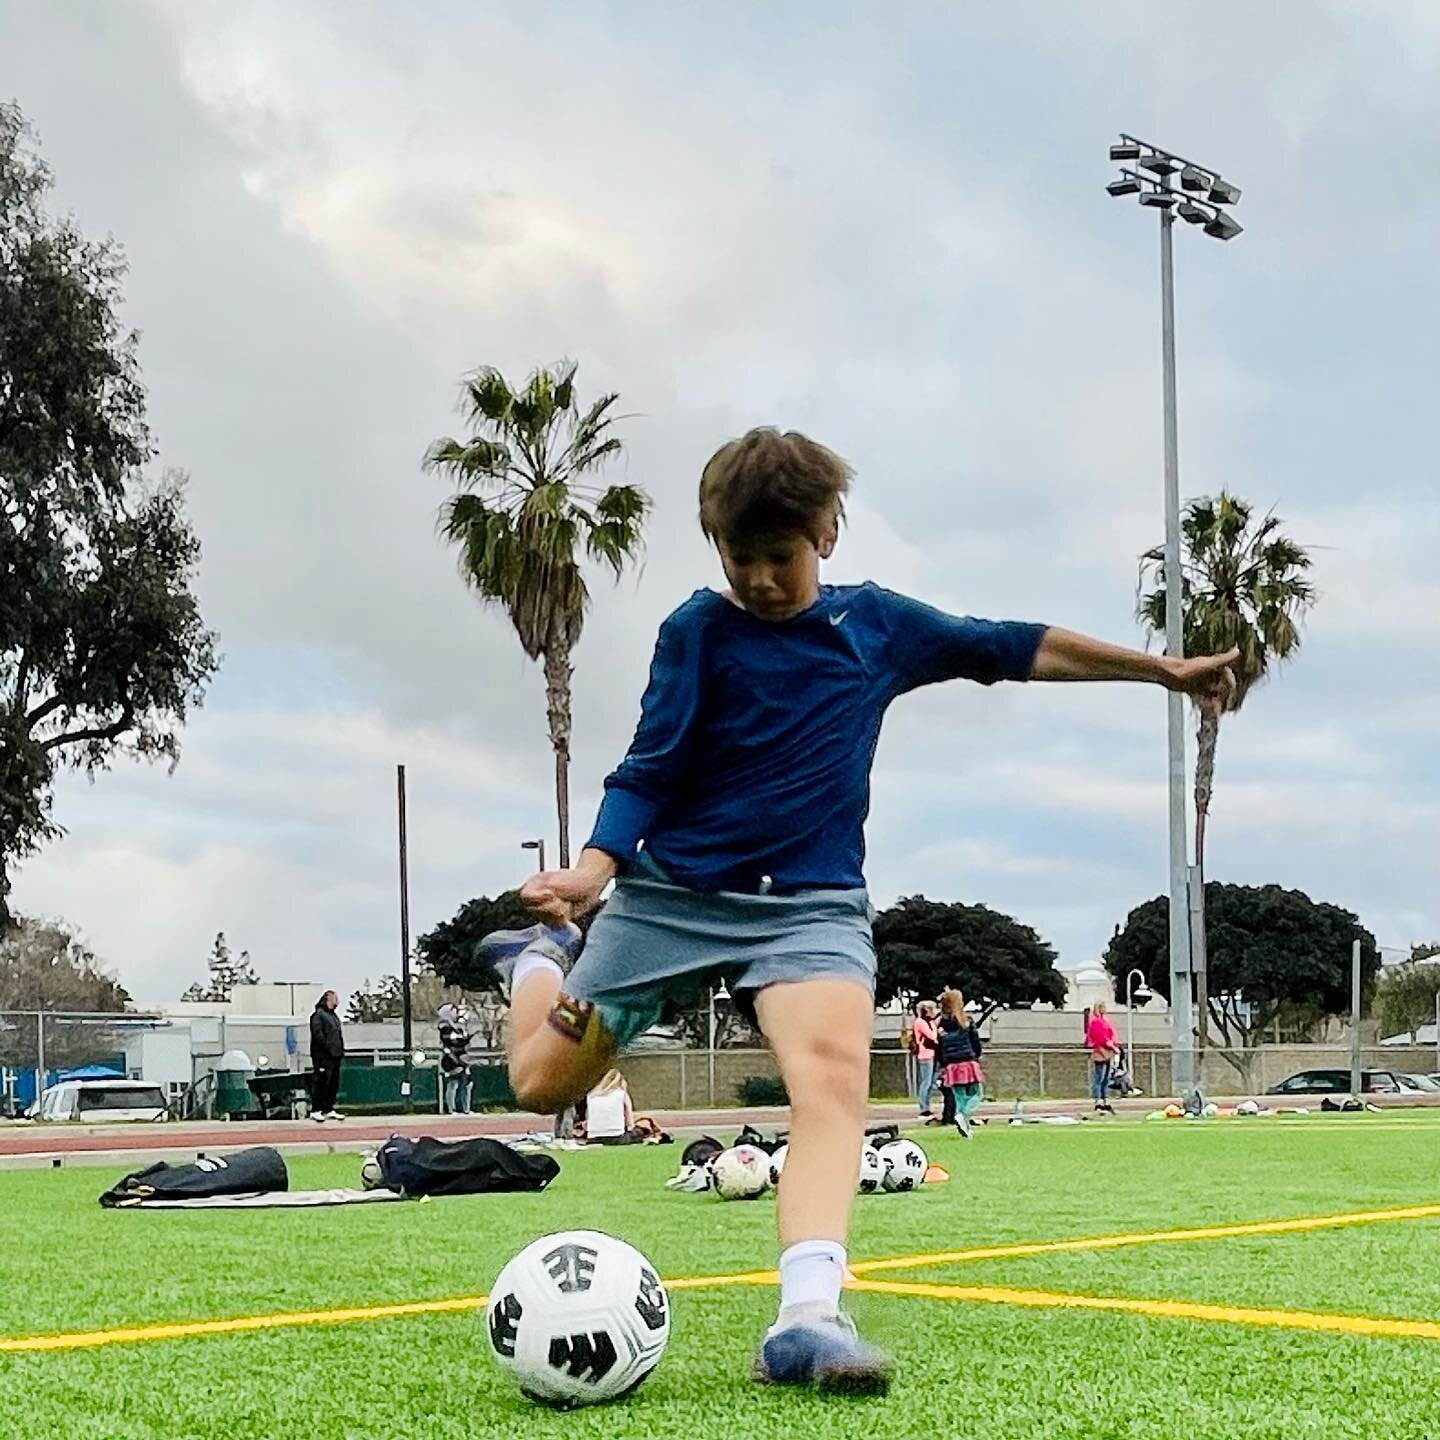 Nor rain nor shine. These players are always on the grind. #soccer #soccerskills #soccermoves #soccerpractice #soccertraining #soccerplayer #soccerislife #soccerlife #soccerstars #soccertime #soccergame #soccerfan #soccerlove #soccercoach #football #